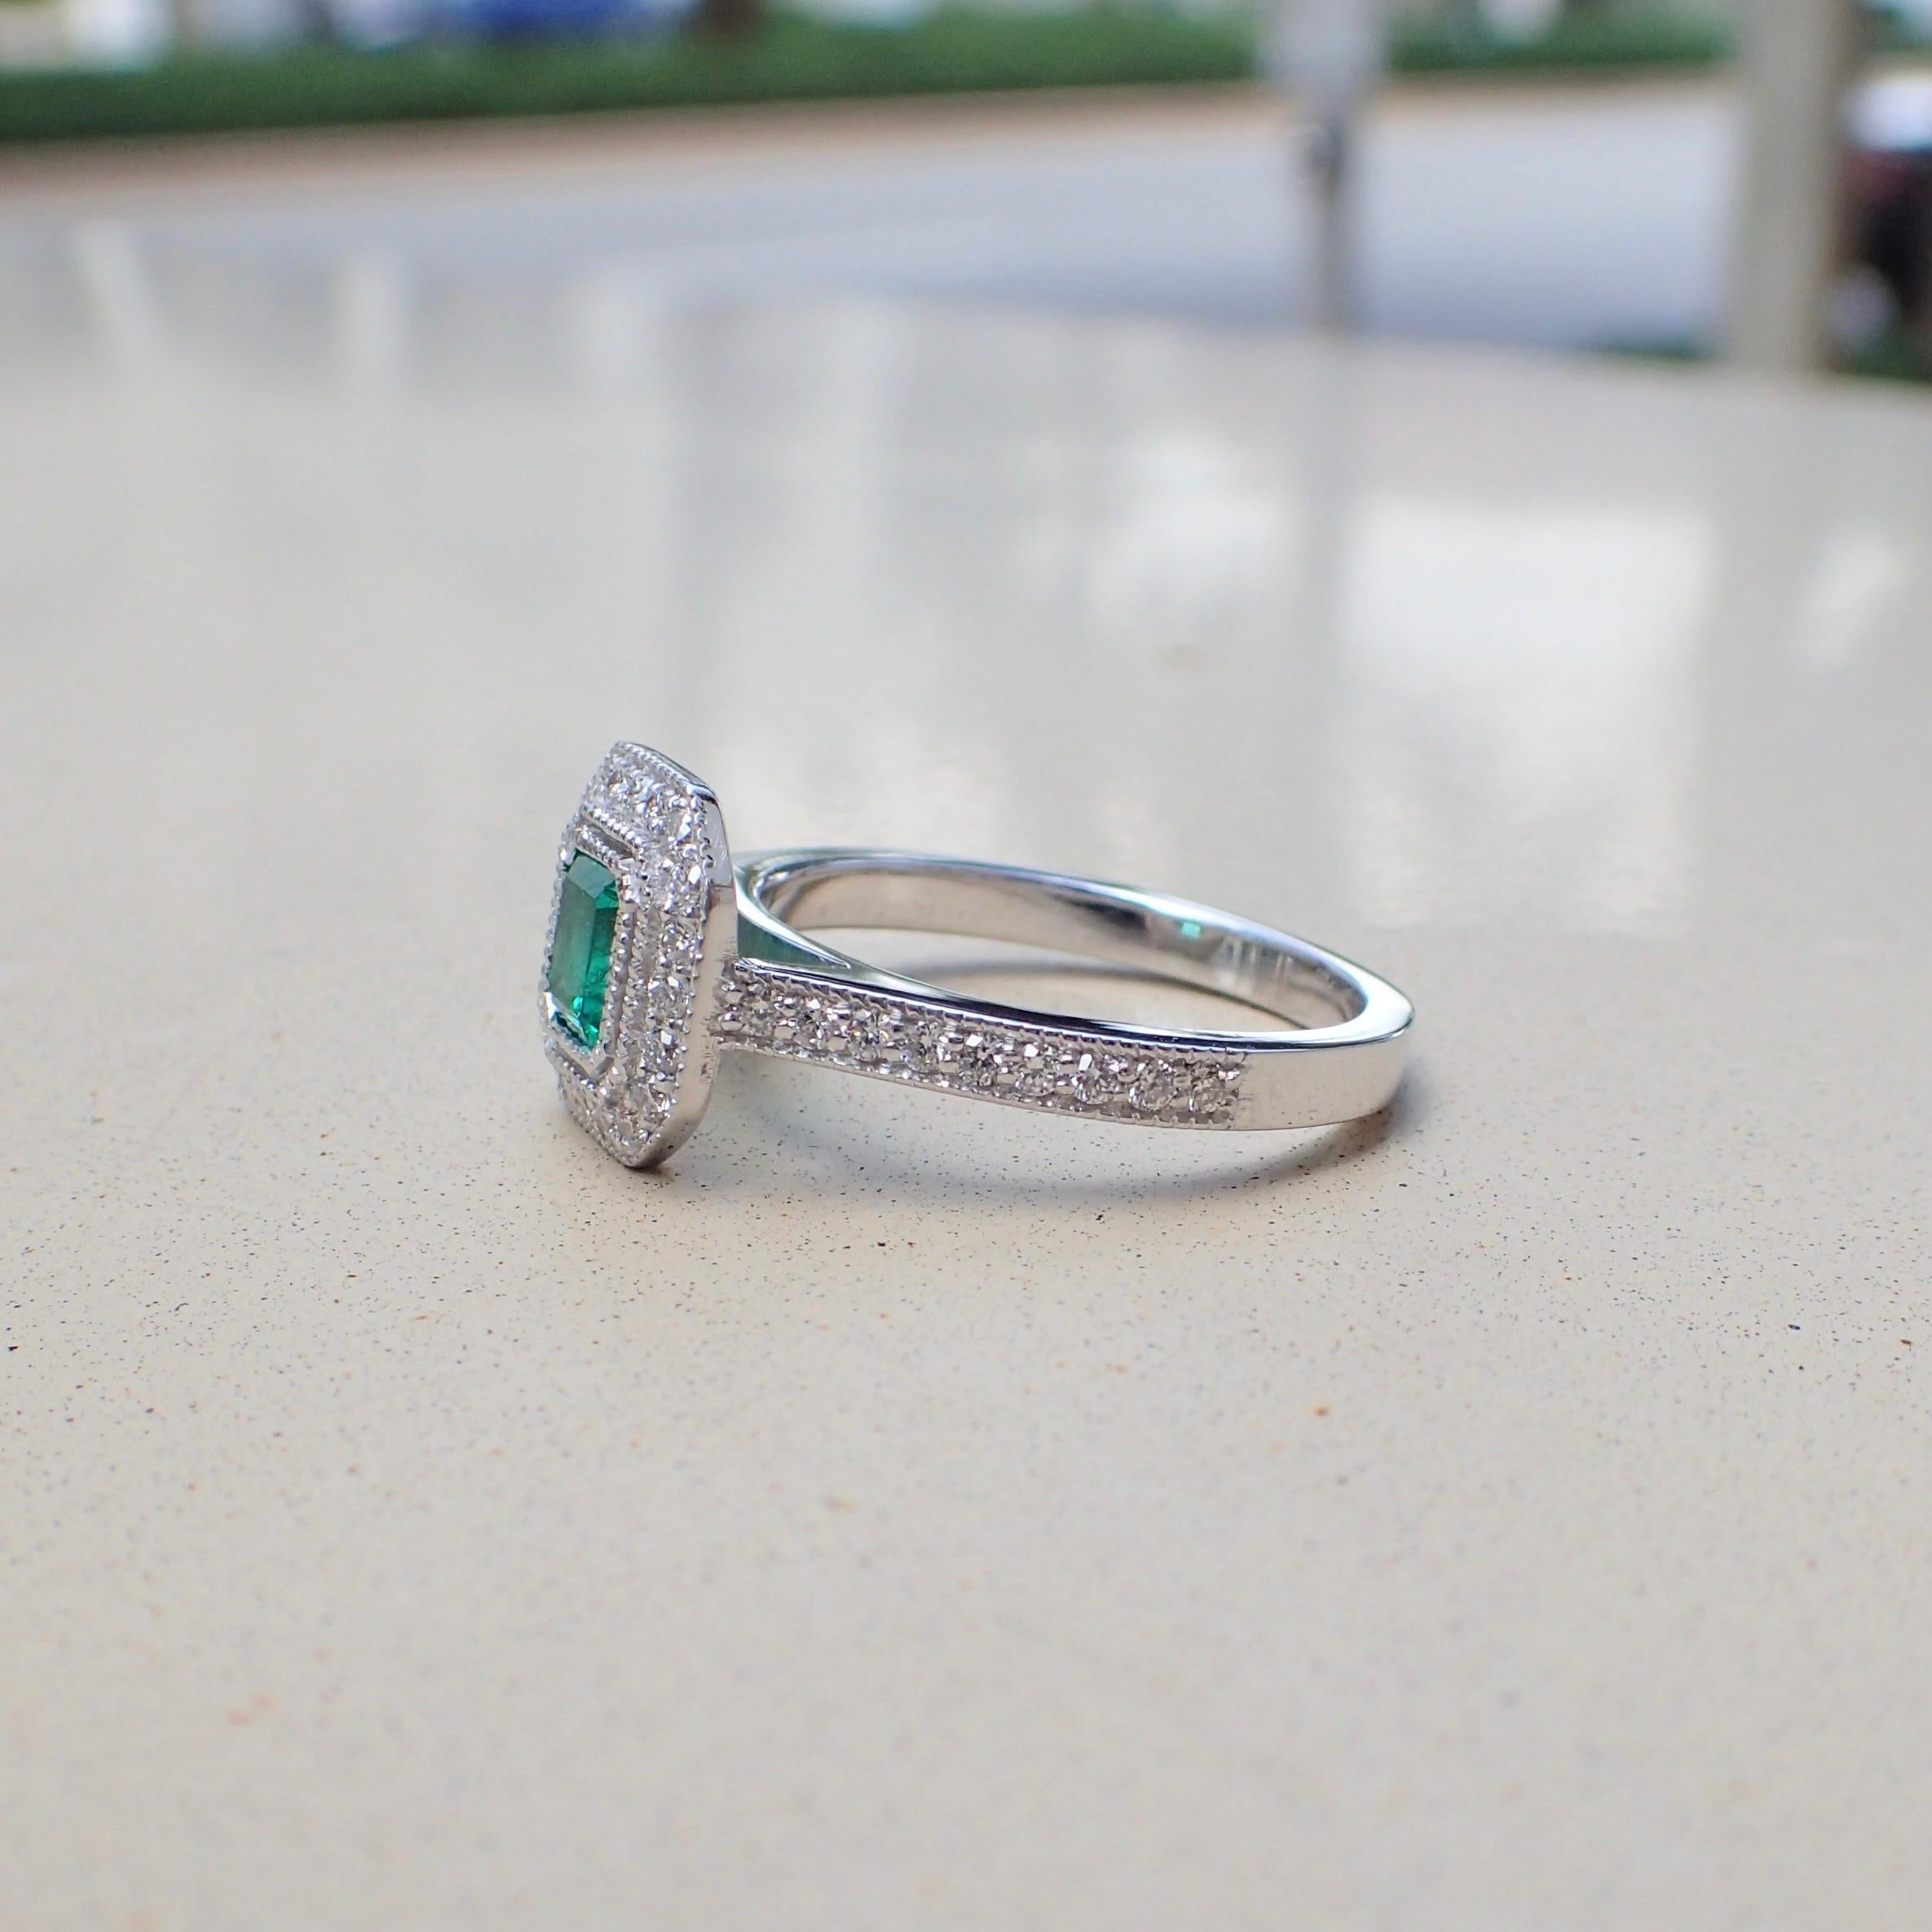 Women's or Men's 18 Karat White Gold Ring with a 0.518 Carat Emerald and 0.37 Carat of Diamond